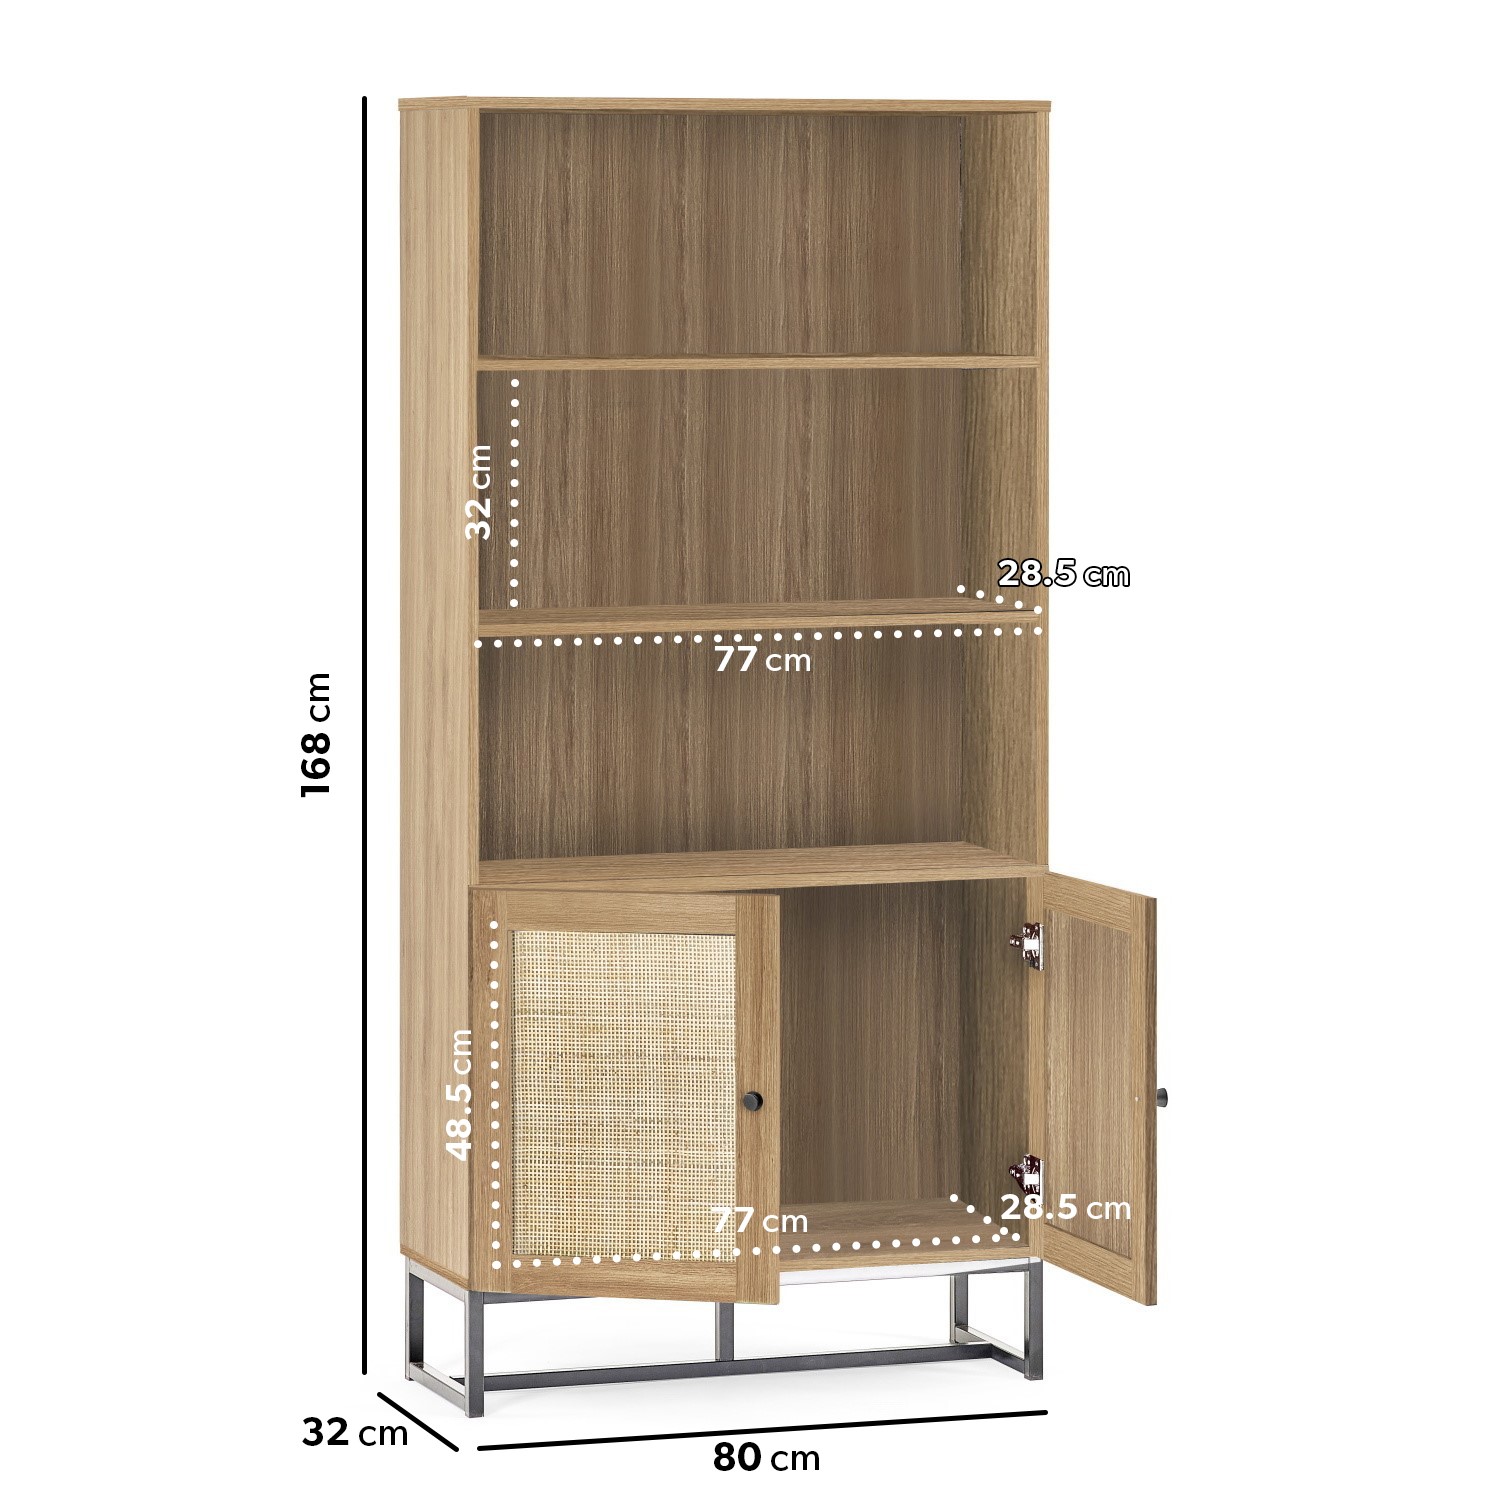 Read more about Tall oak bookcase with rattan doors 3 shelves padstow